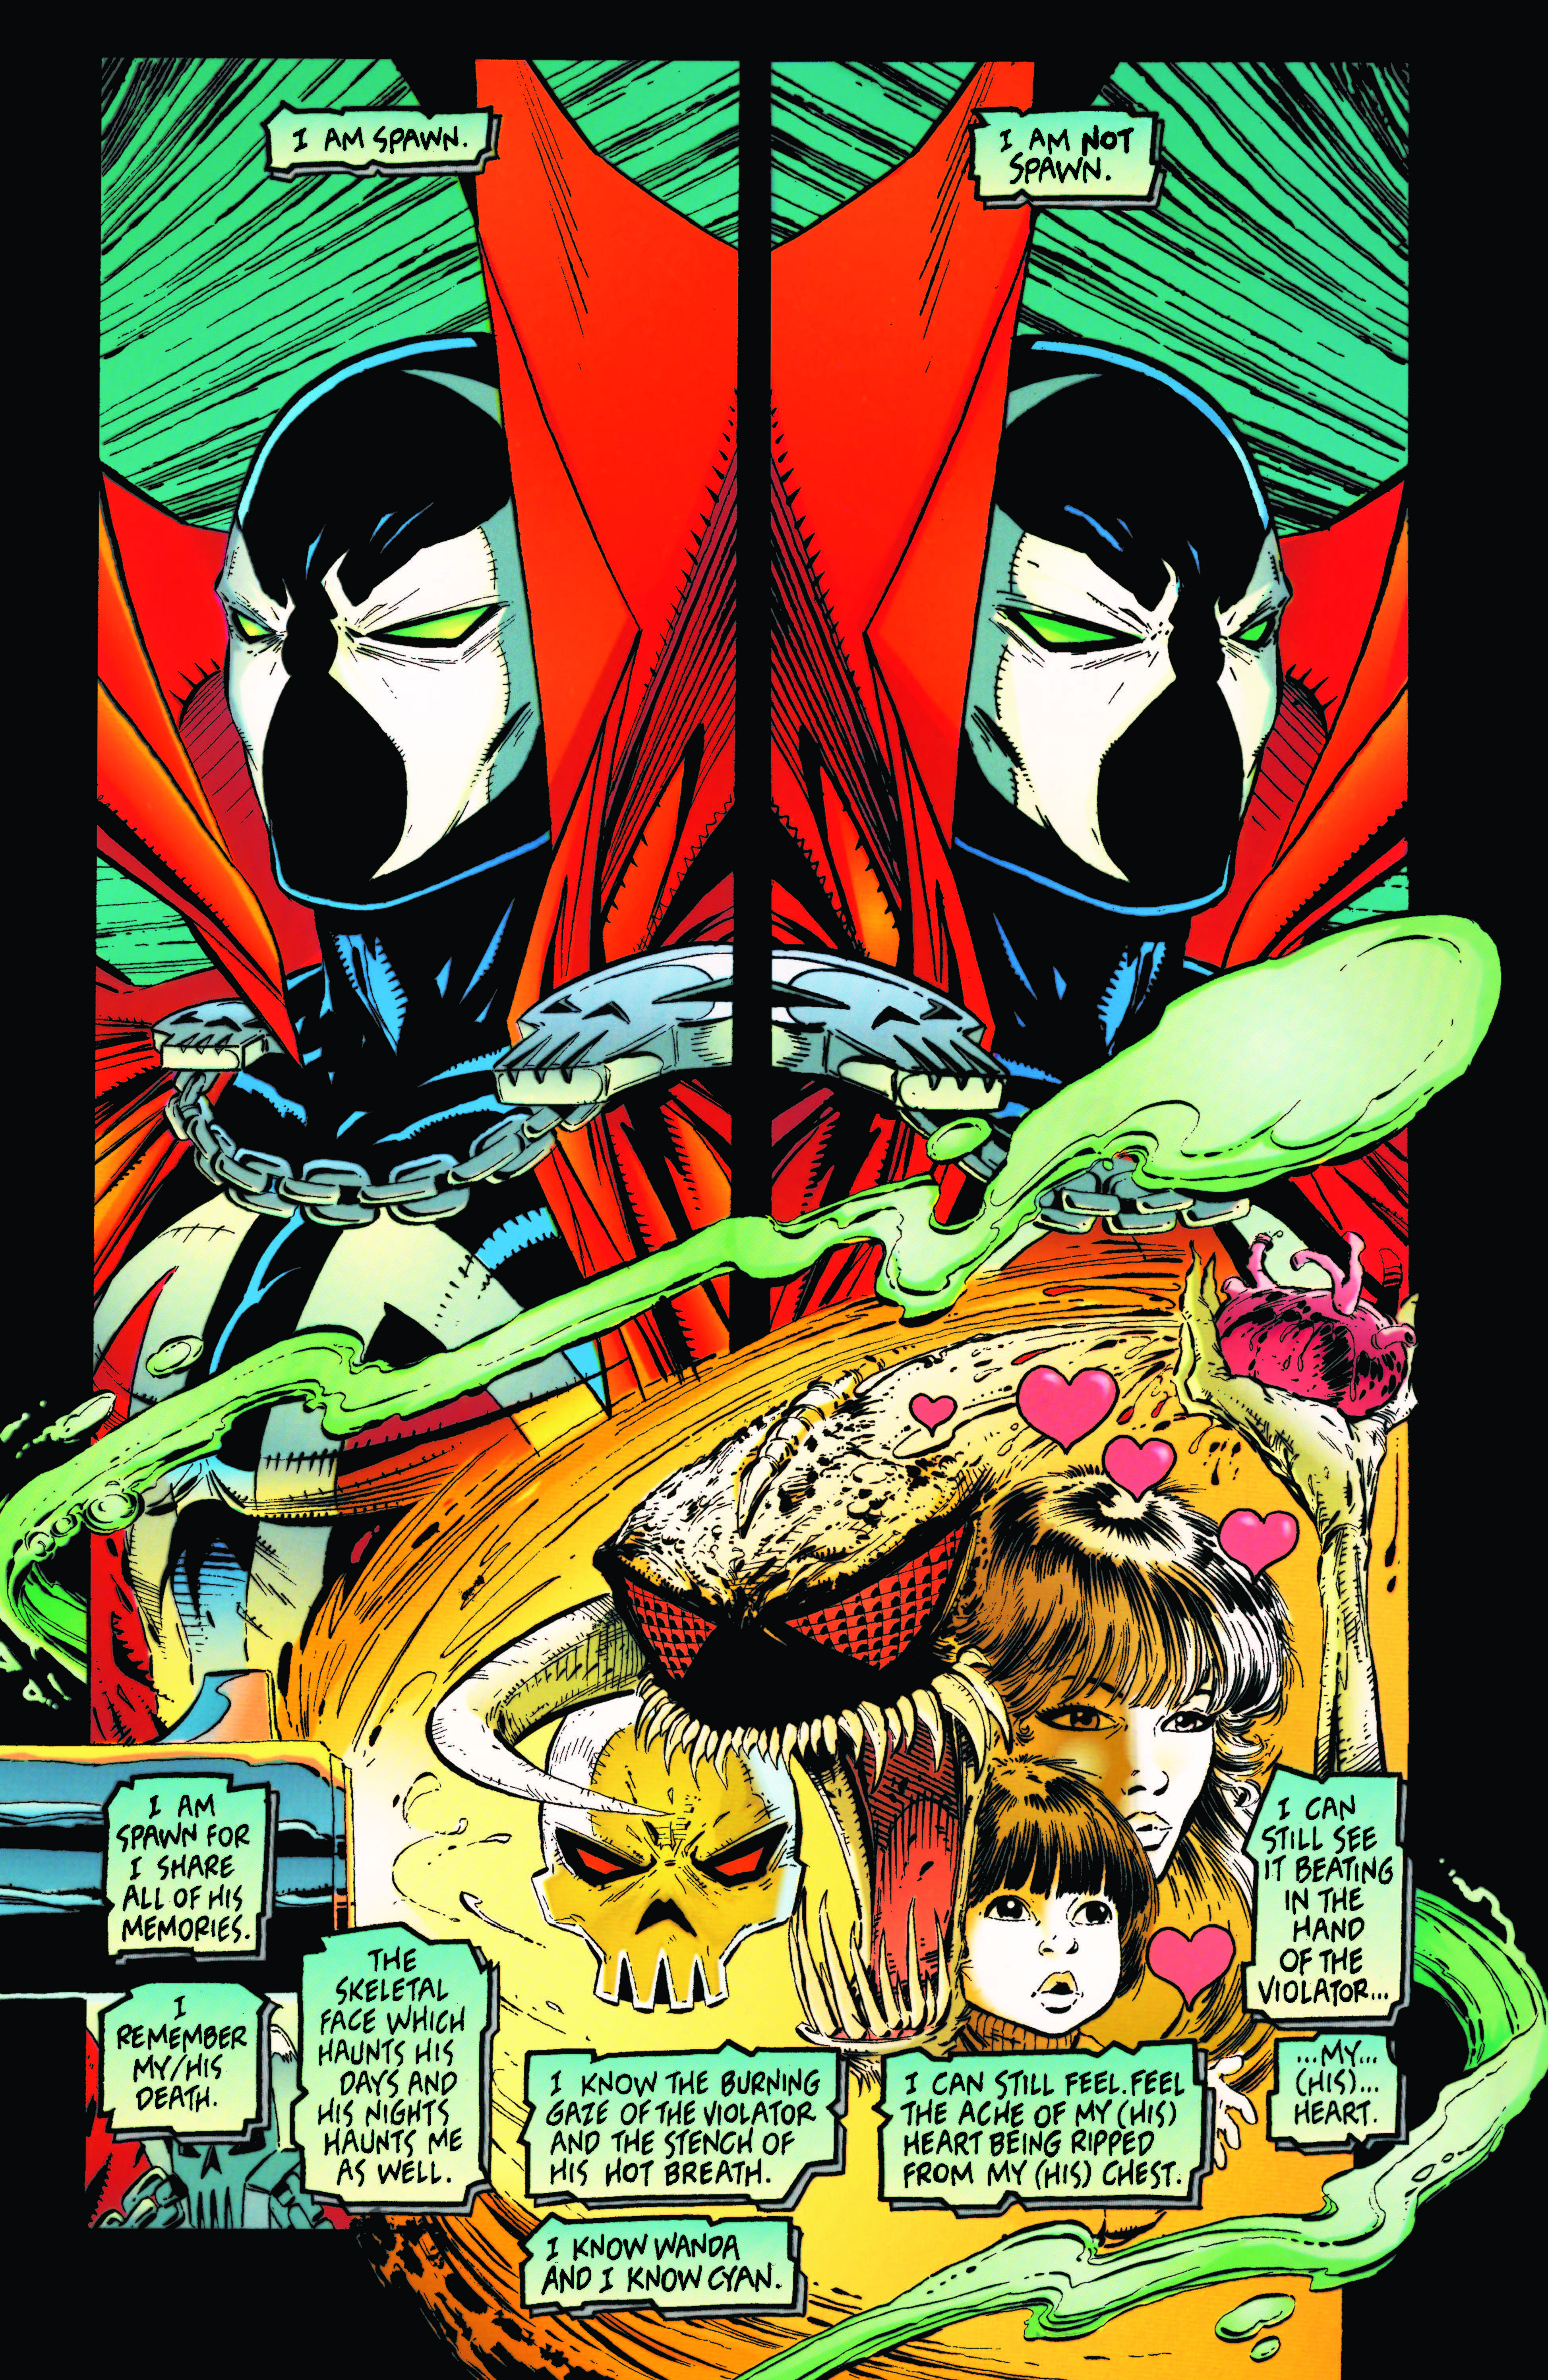 Pages ffrom Spawn10_DE-2